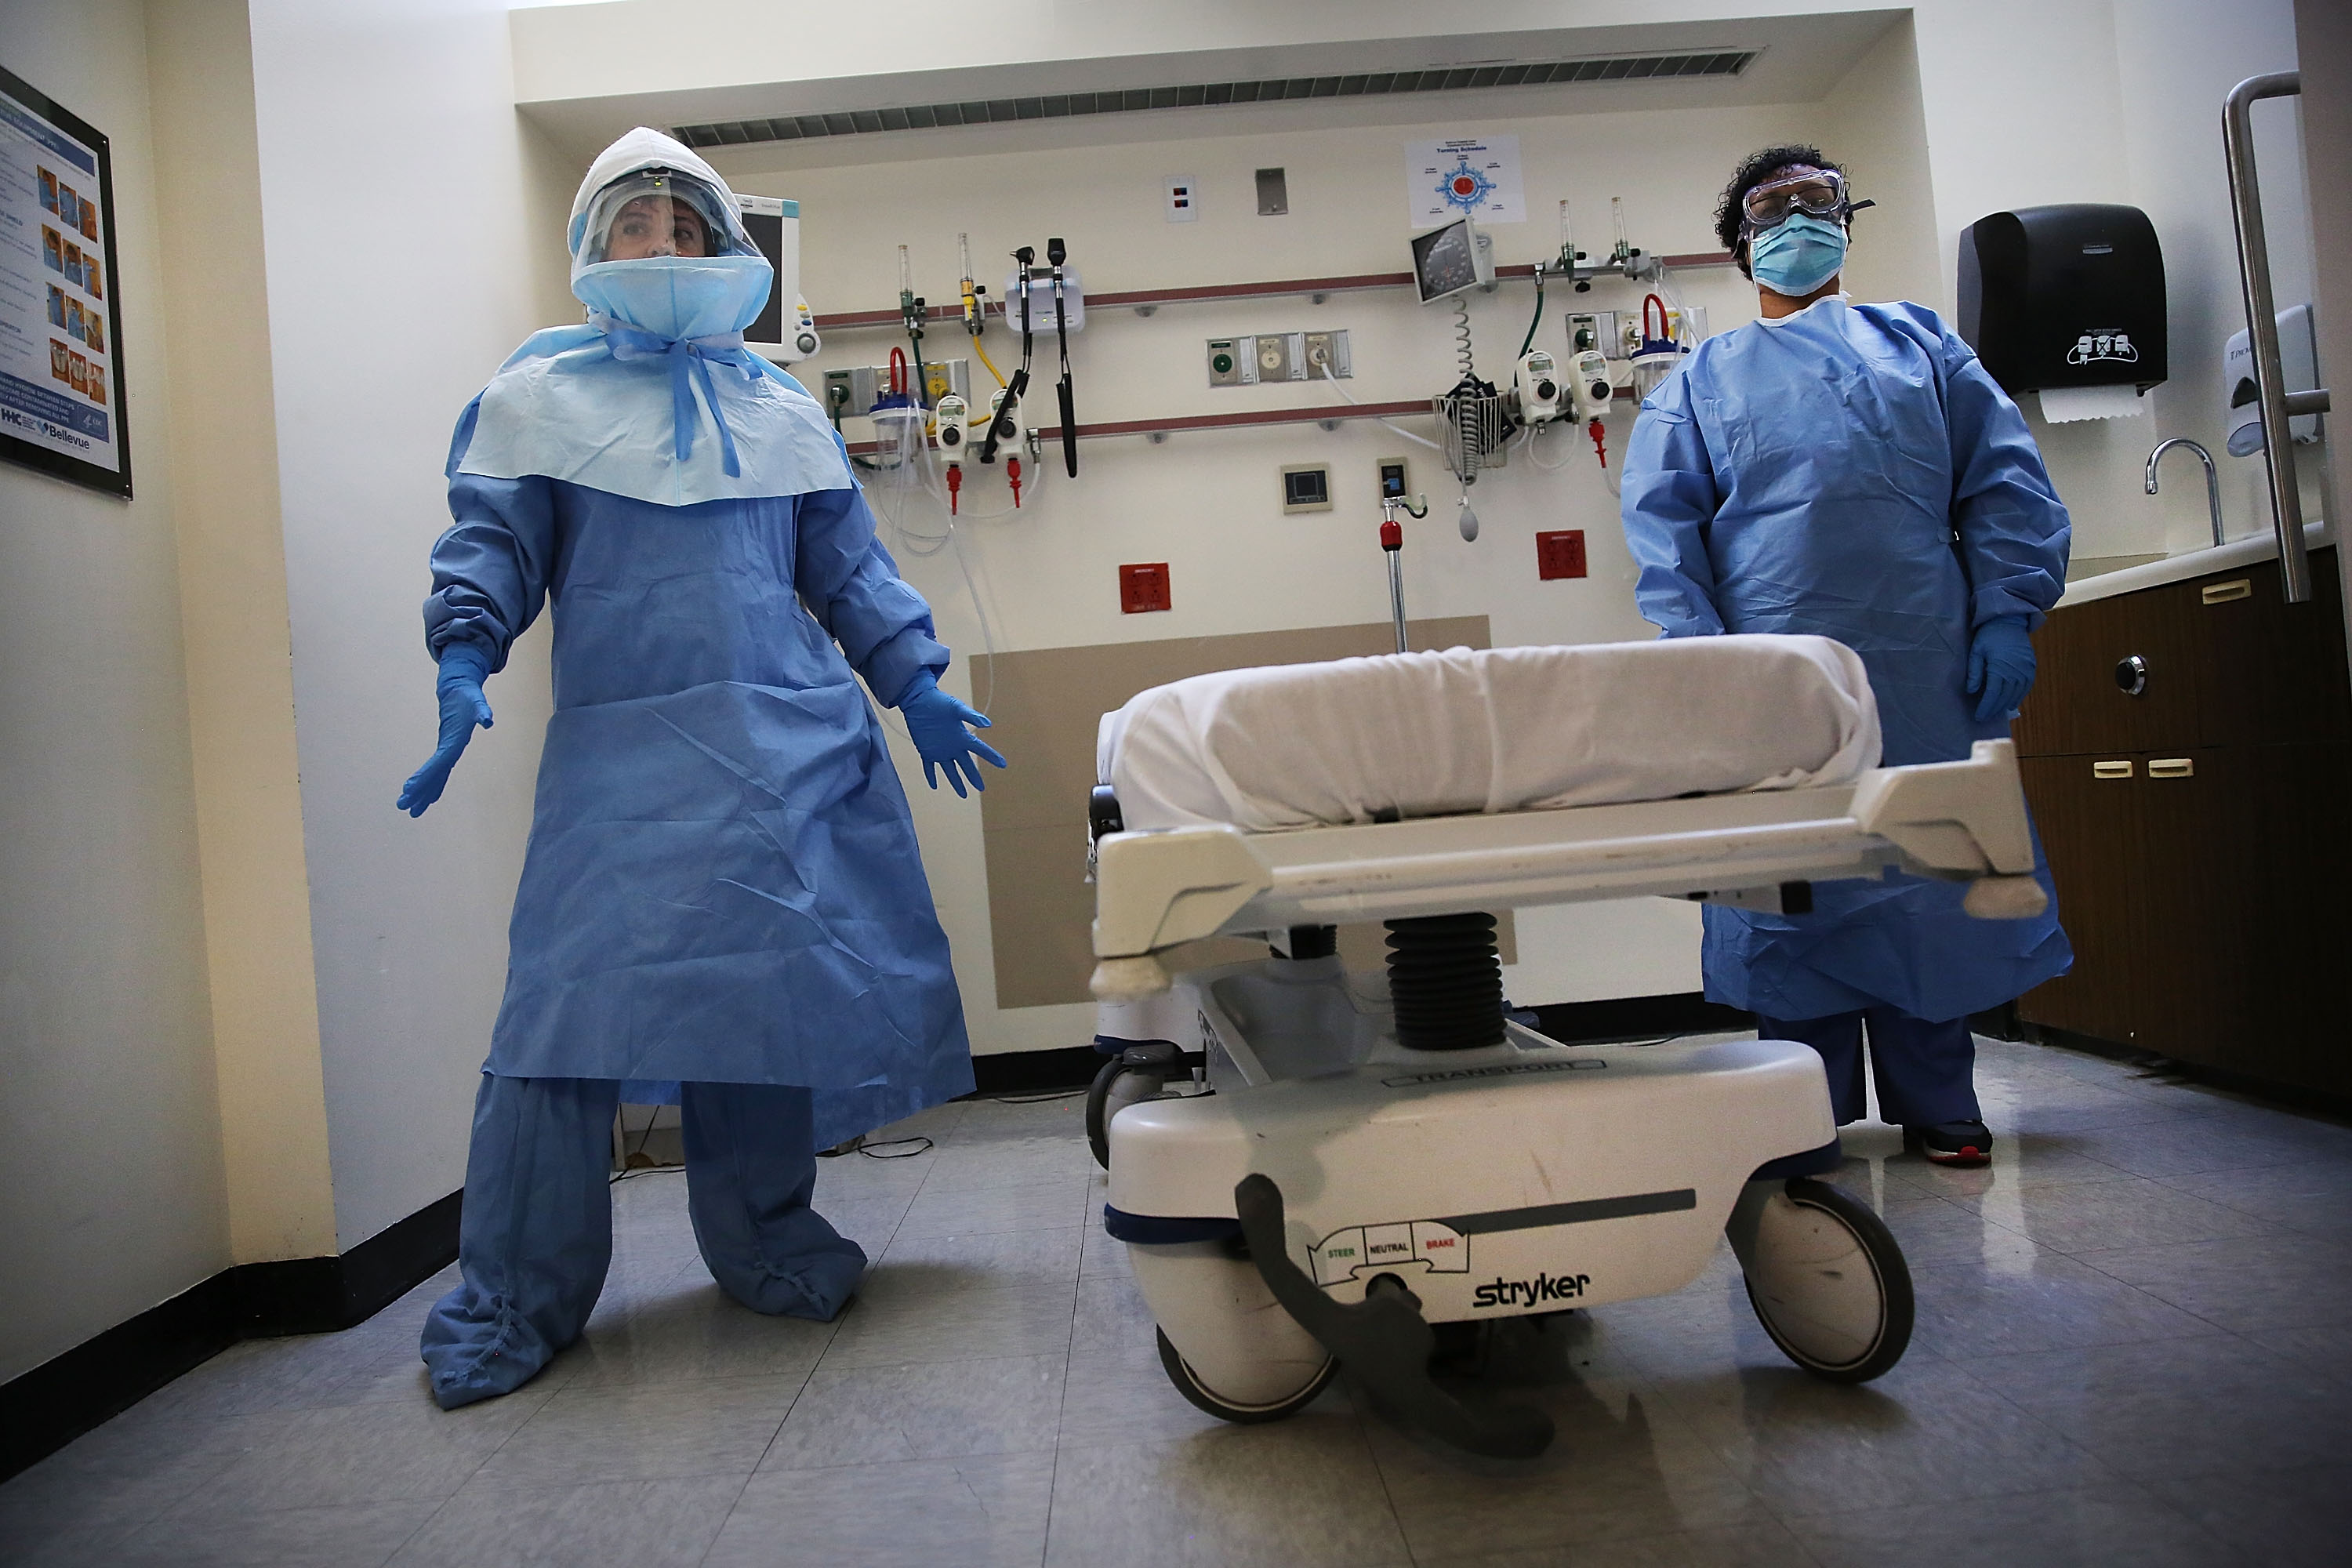 Members of Bellevue Hospital staff wear protective clothing as they demonstrate how they would receive a suspected Ebola patient on Oct. 8, 2014 in New York City.